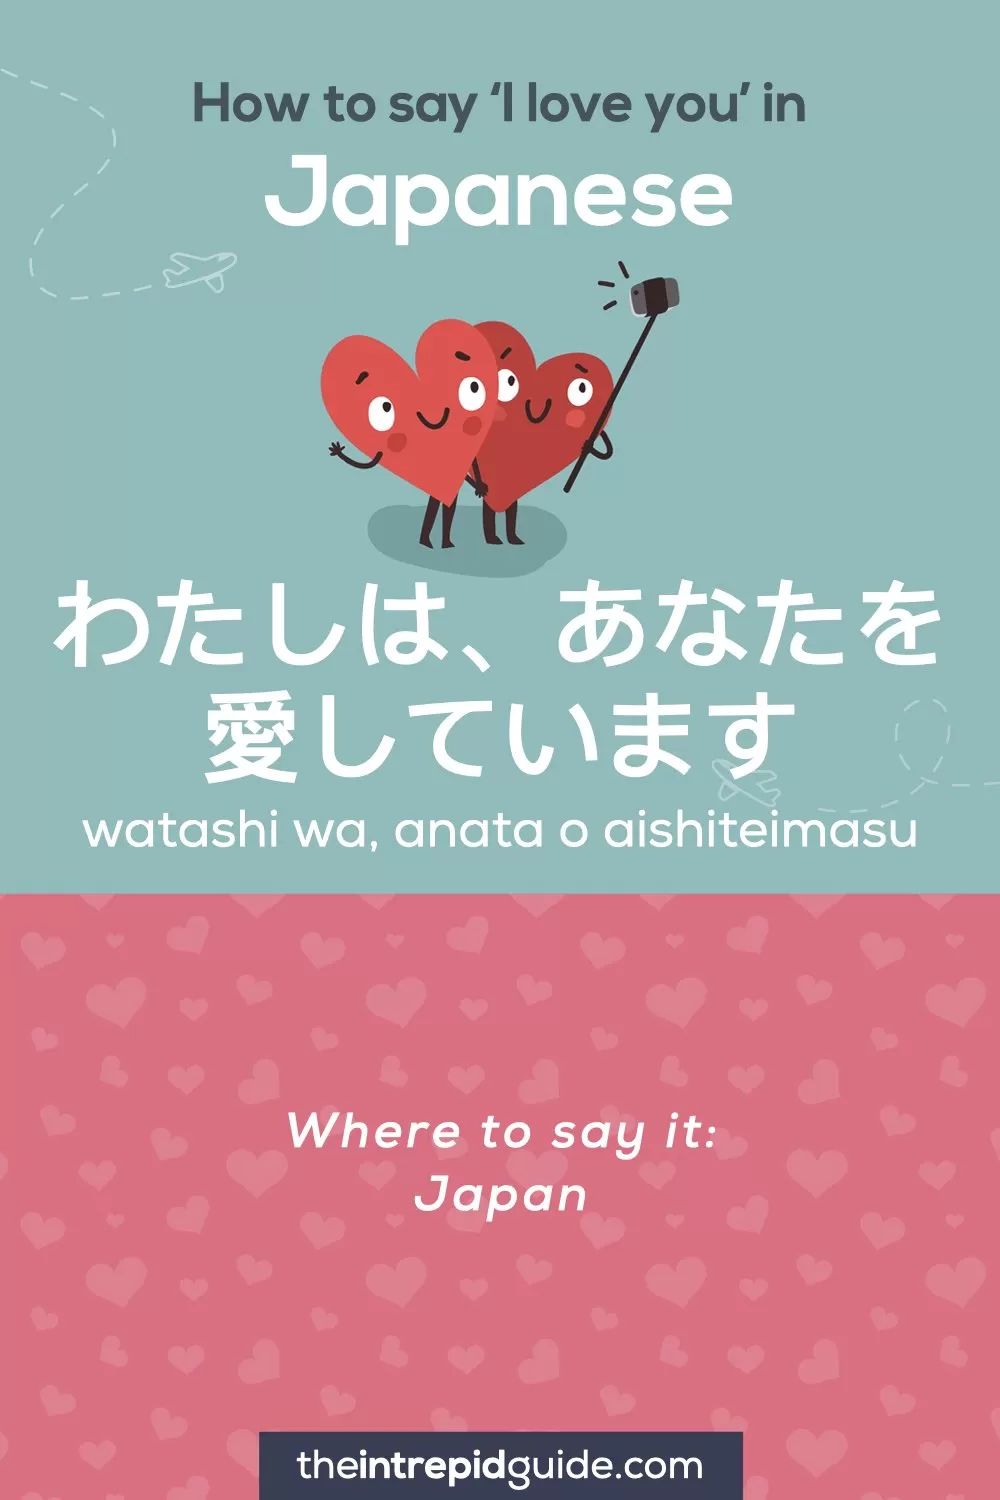 How to say I love you in different languages - Japanese - わたしは、あなたを愛しています